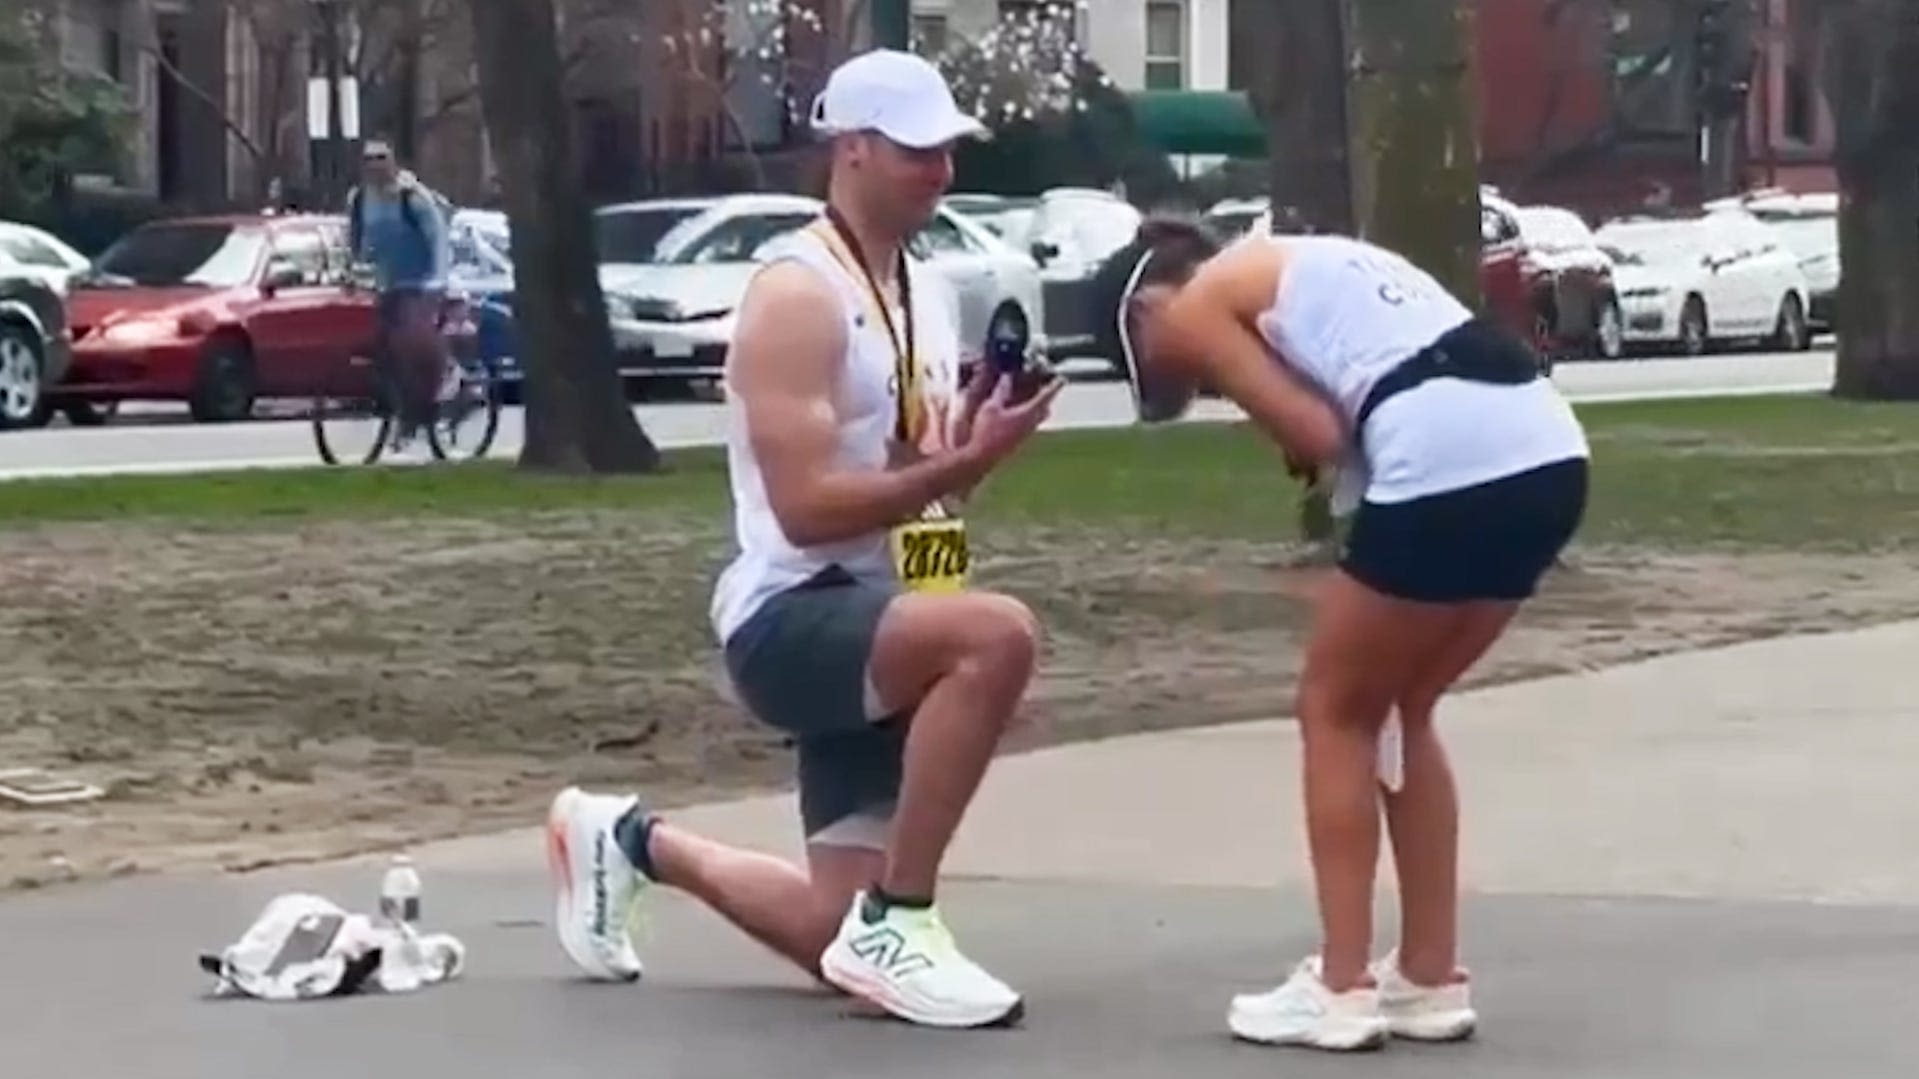 Watch Boston Marathon runner propose to girlfriend after she crosses the finish line